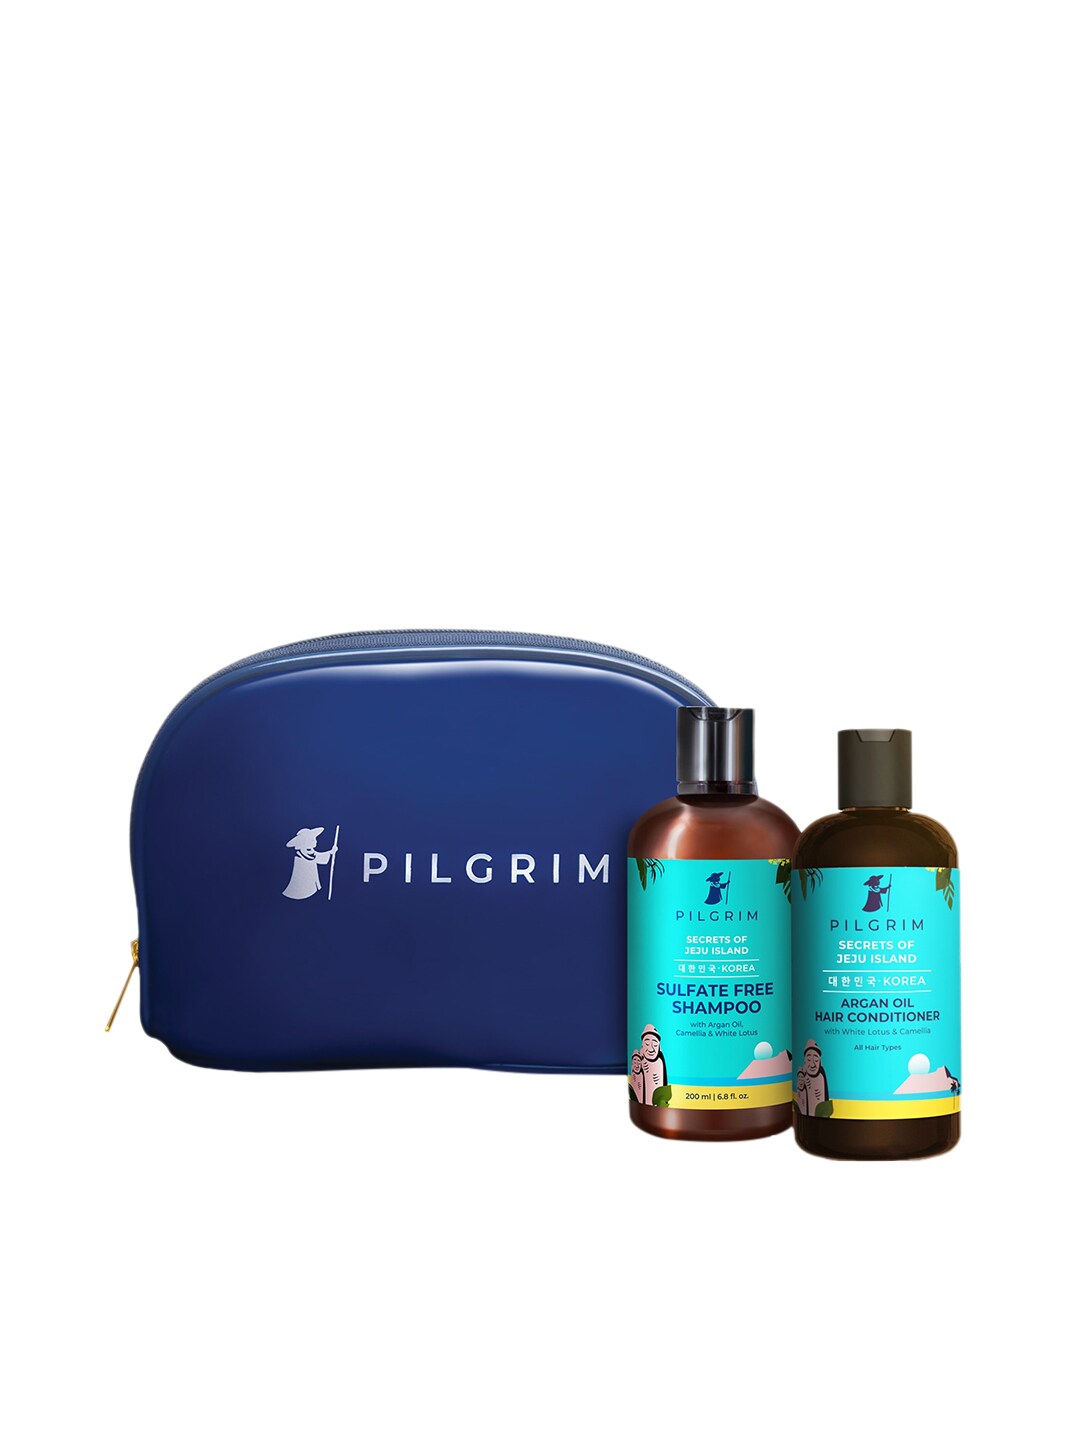 Pilgrim Set Of 2 Sulphate Free Shampoo & Argan Oil Hair Conditioner With Vanity Bag Price in India